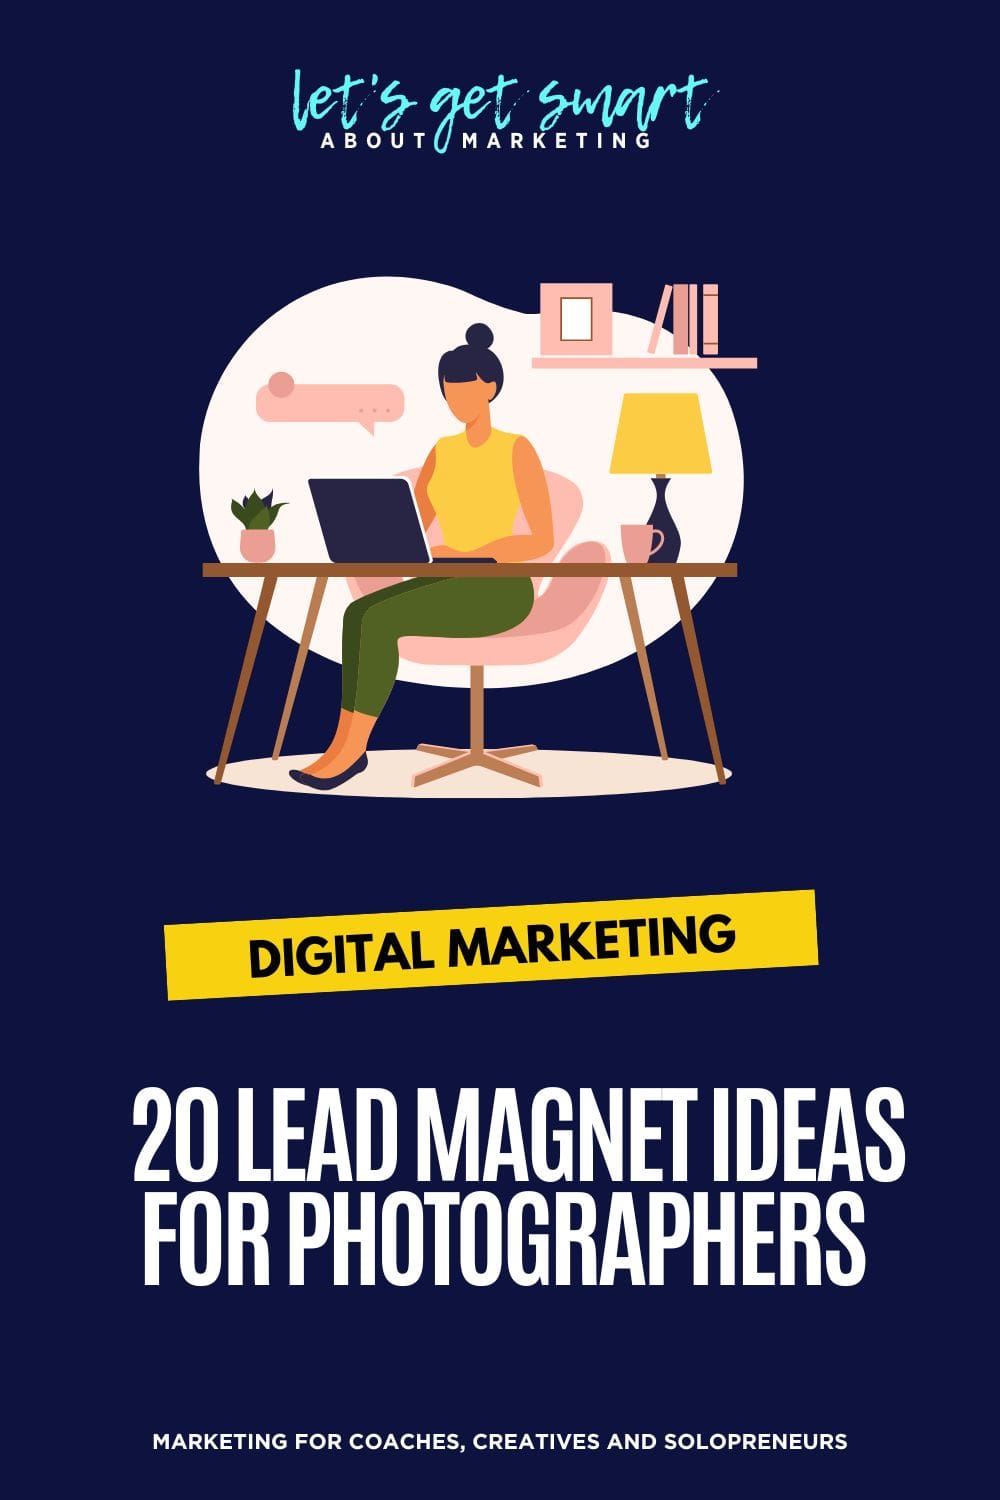 20 Lead Magnet Ideas for Photographers Who Want More Clients